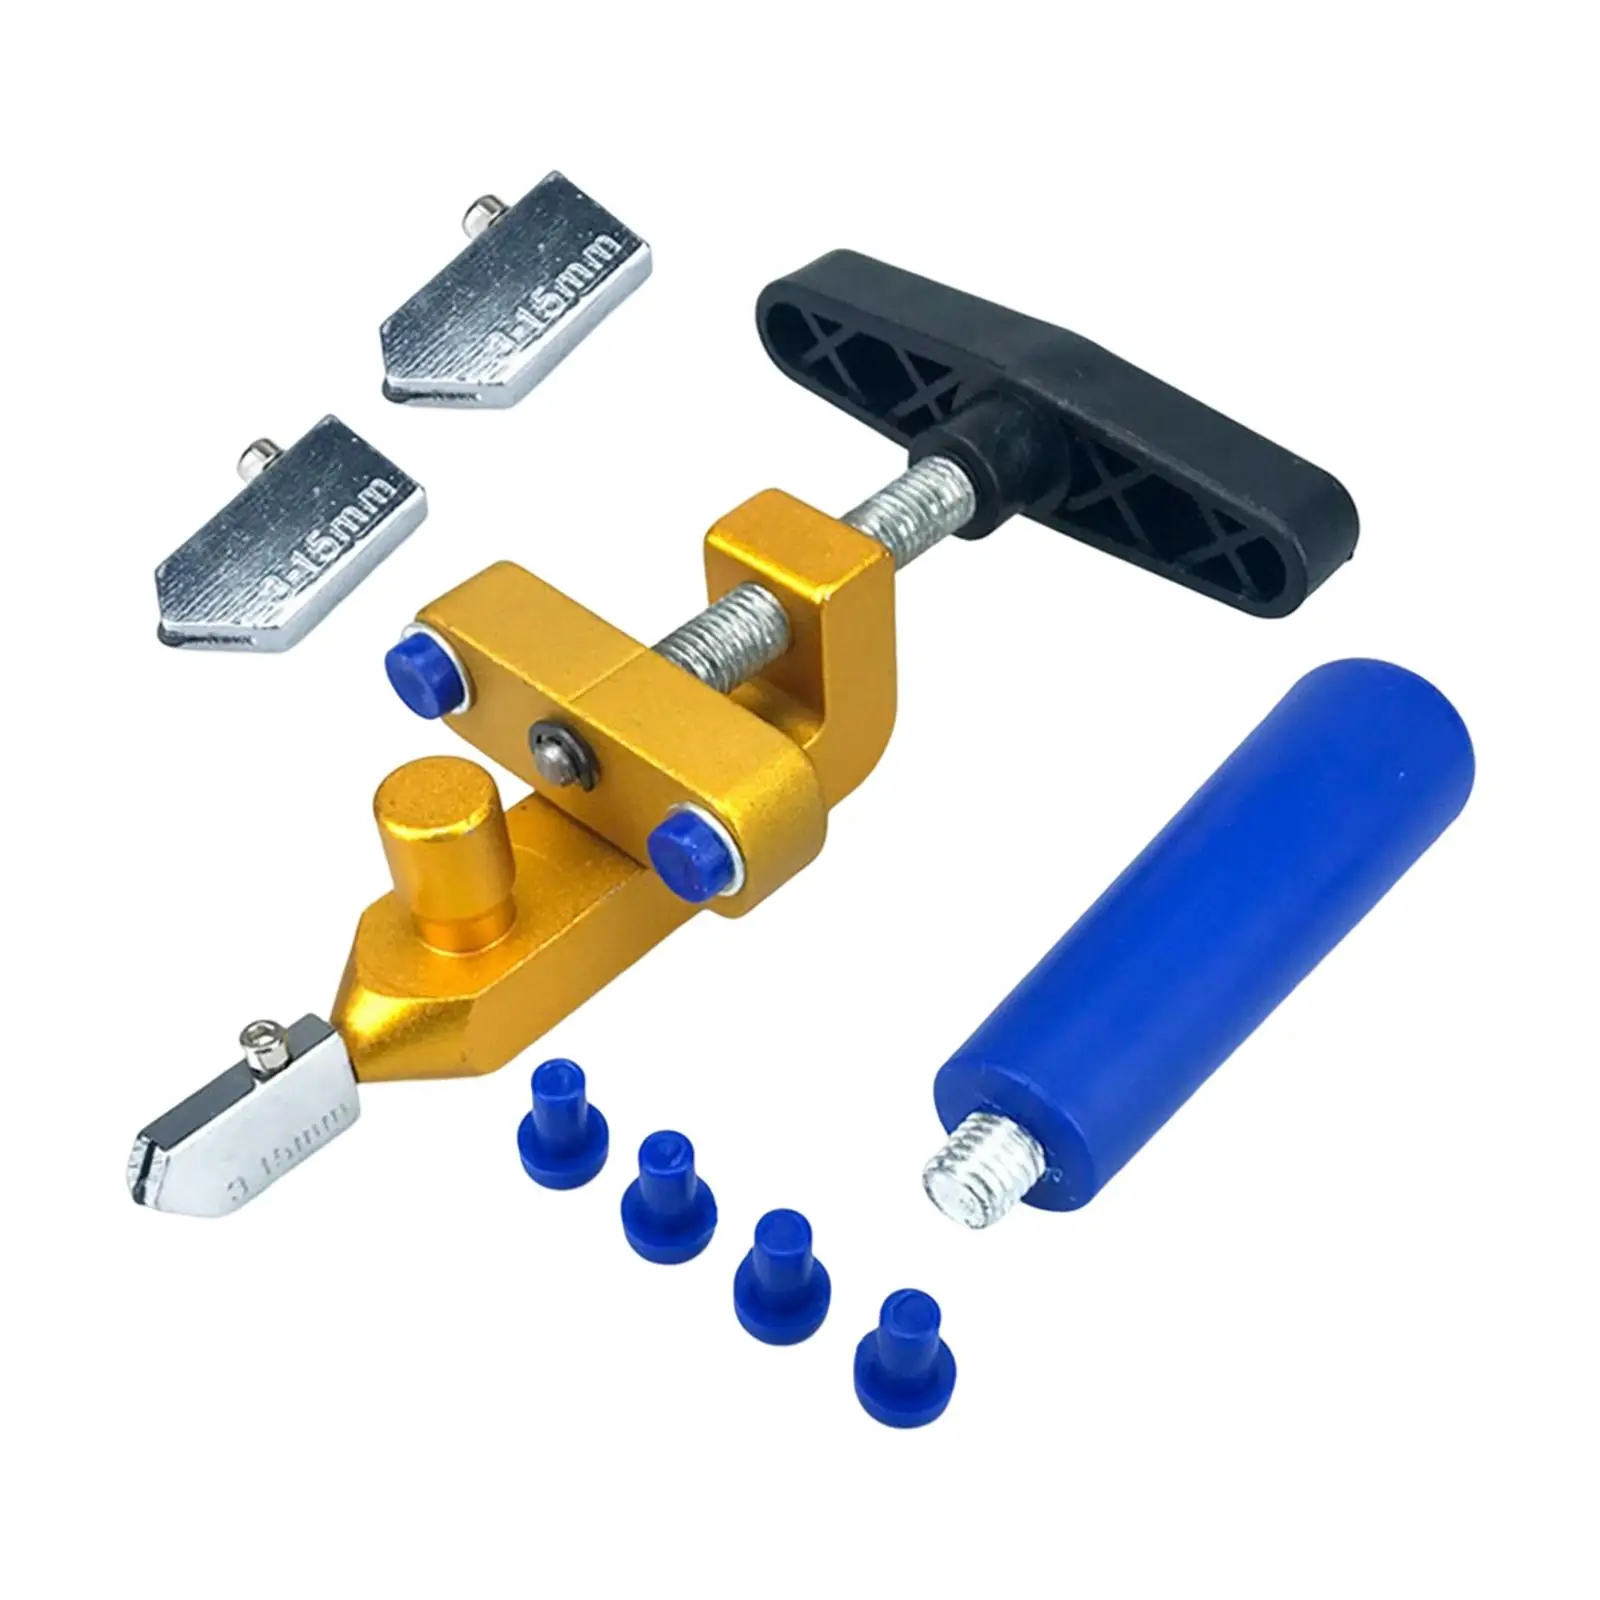 Multifunctional Glass Cutter Lightweight Portable Cutting Machine Hand Tools Ceramic Tile Opener for Tiles Home DIY Ceramic